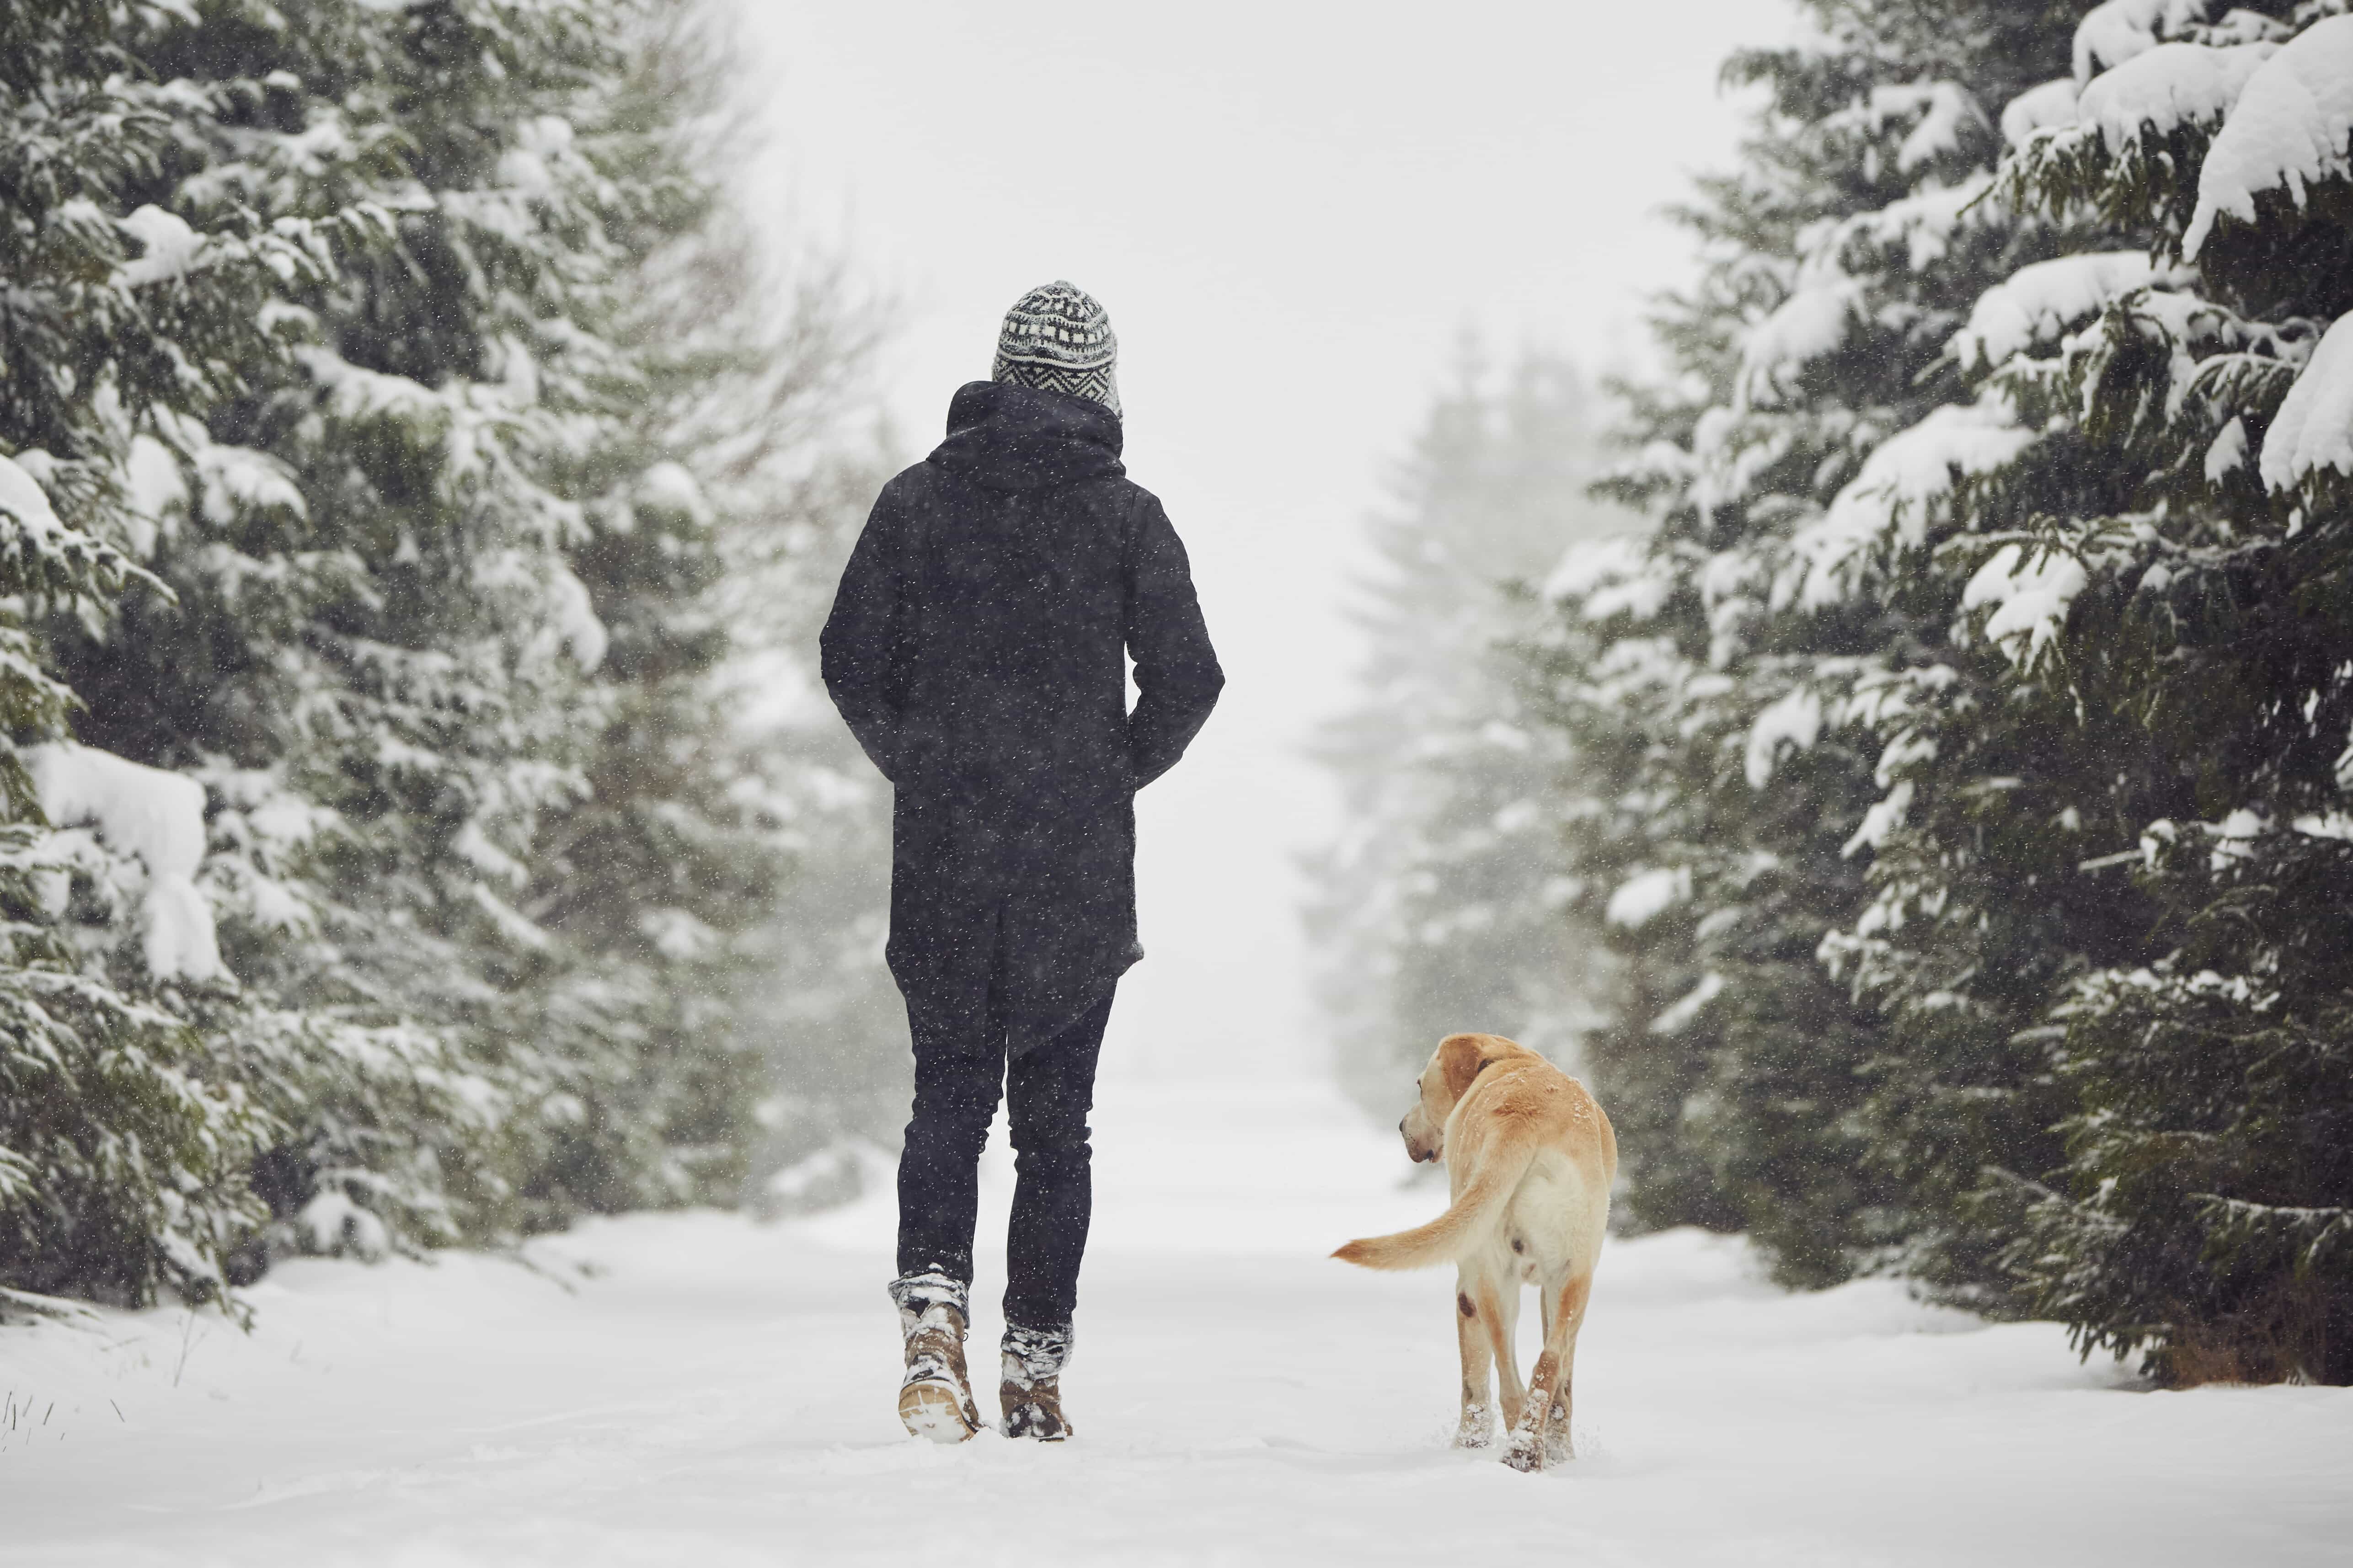 Walking in a wintery landscape with a dog